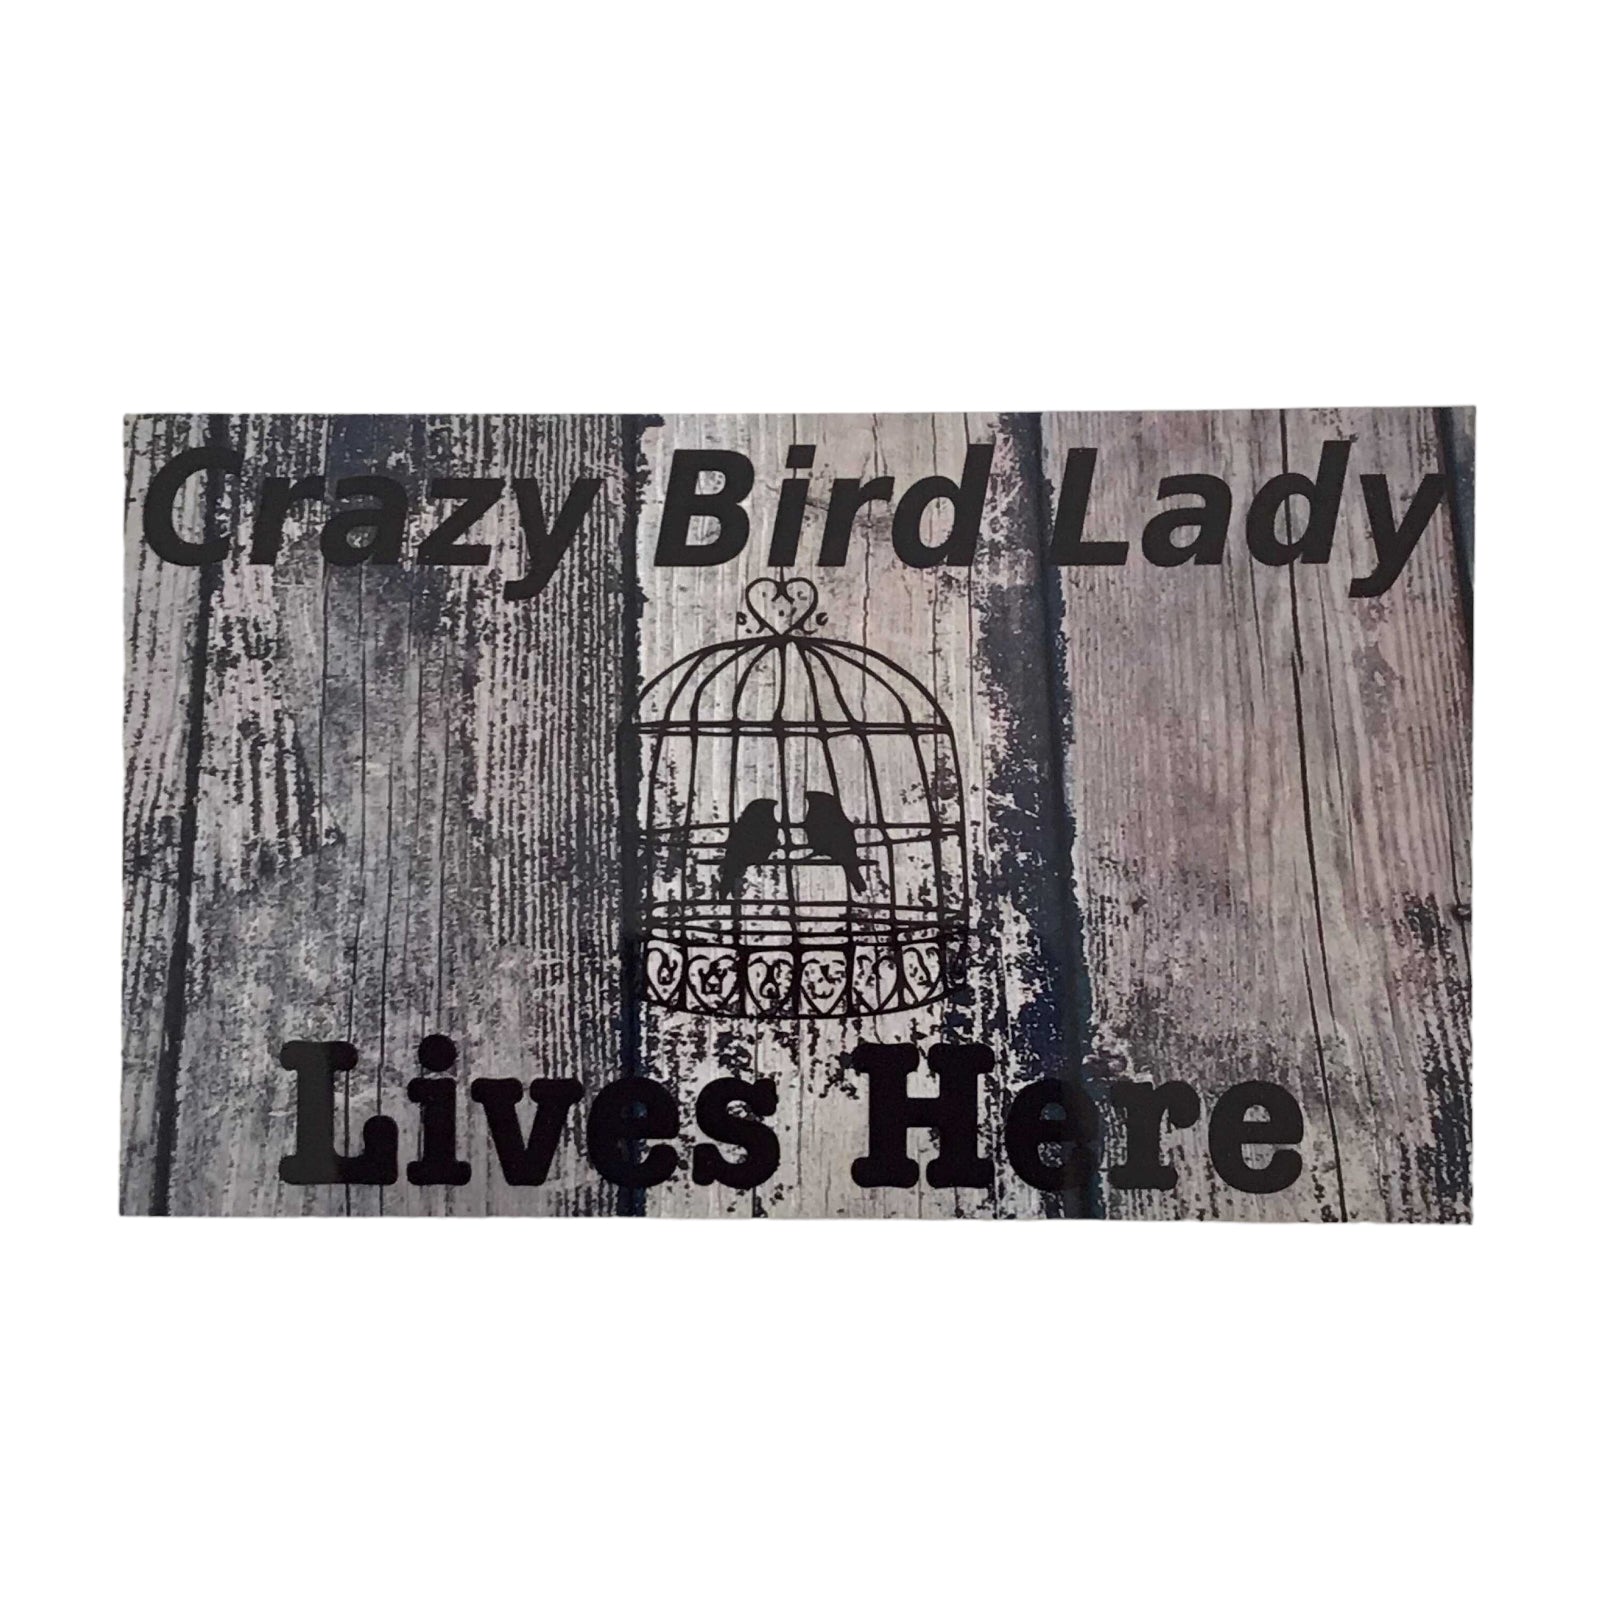 Crazy Bird Lady Lives Here Sign - The Renmy Store Homewares & Gifts 